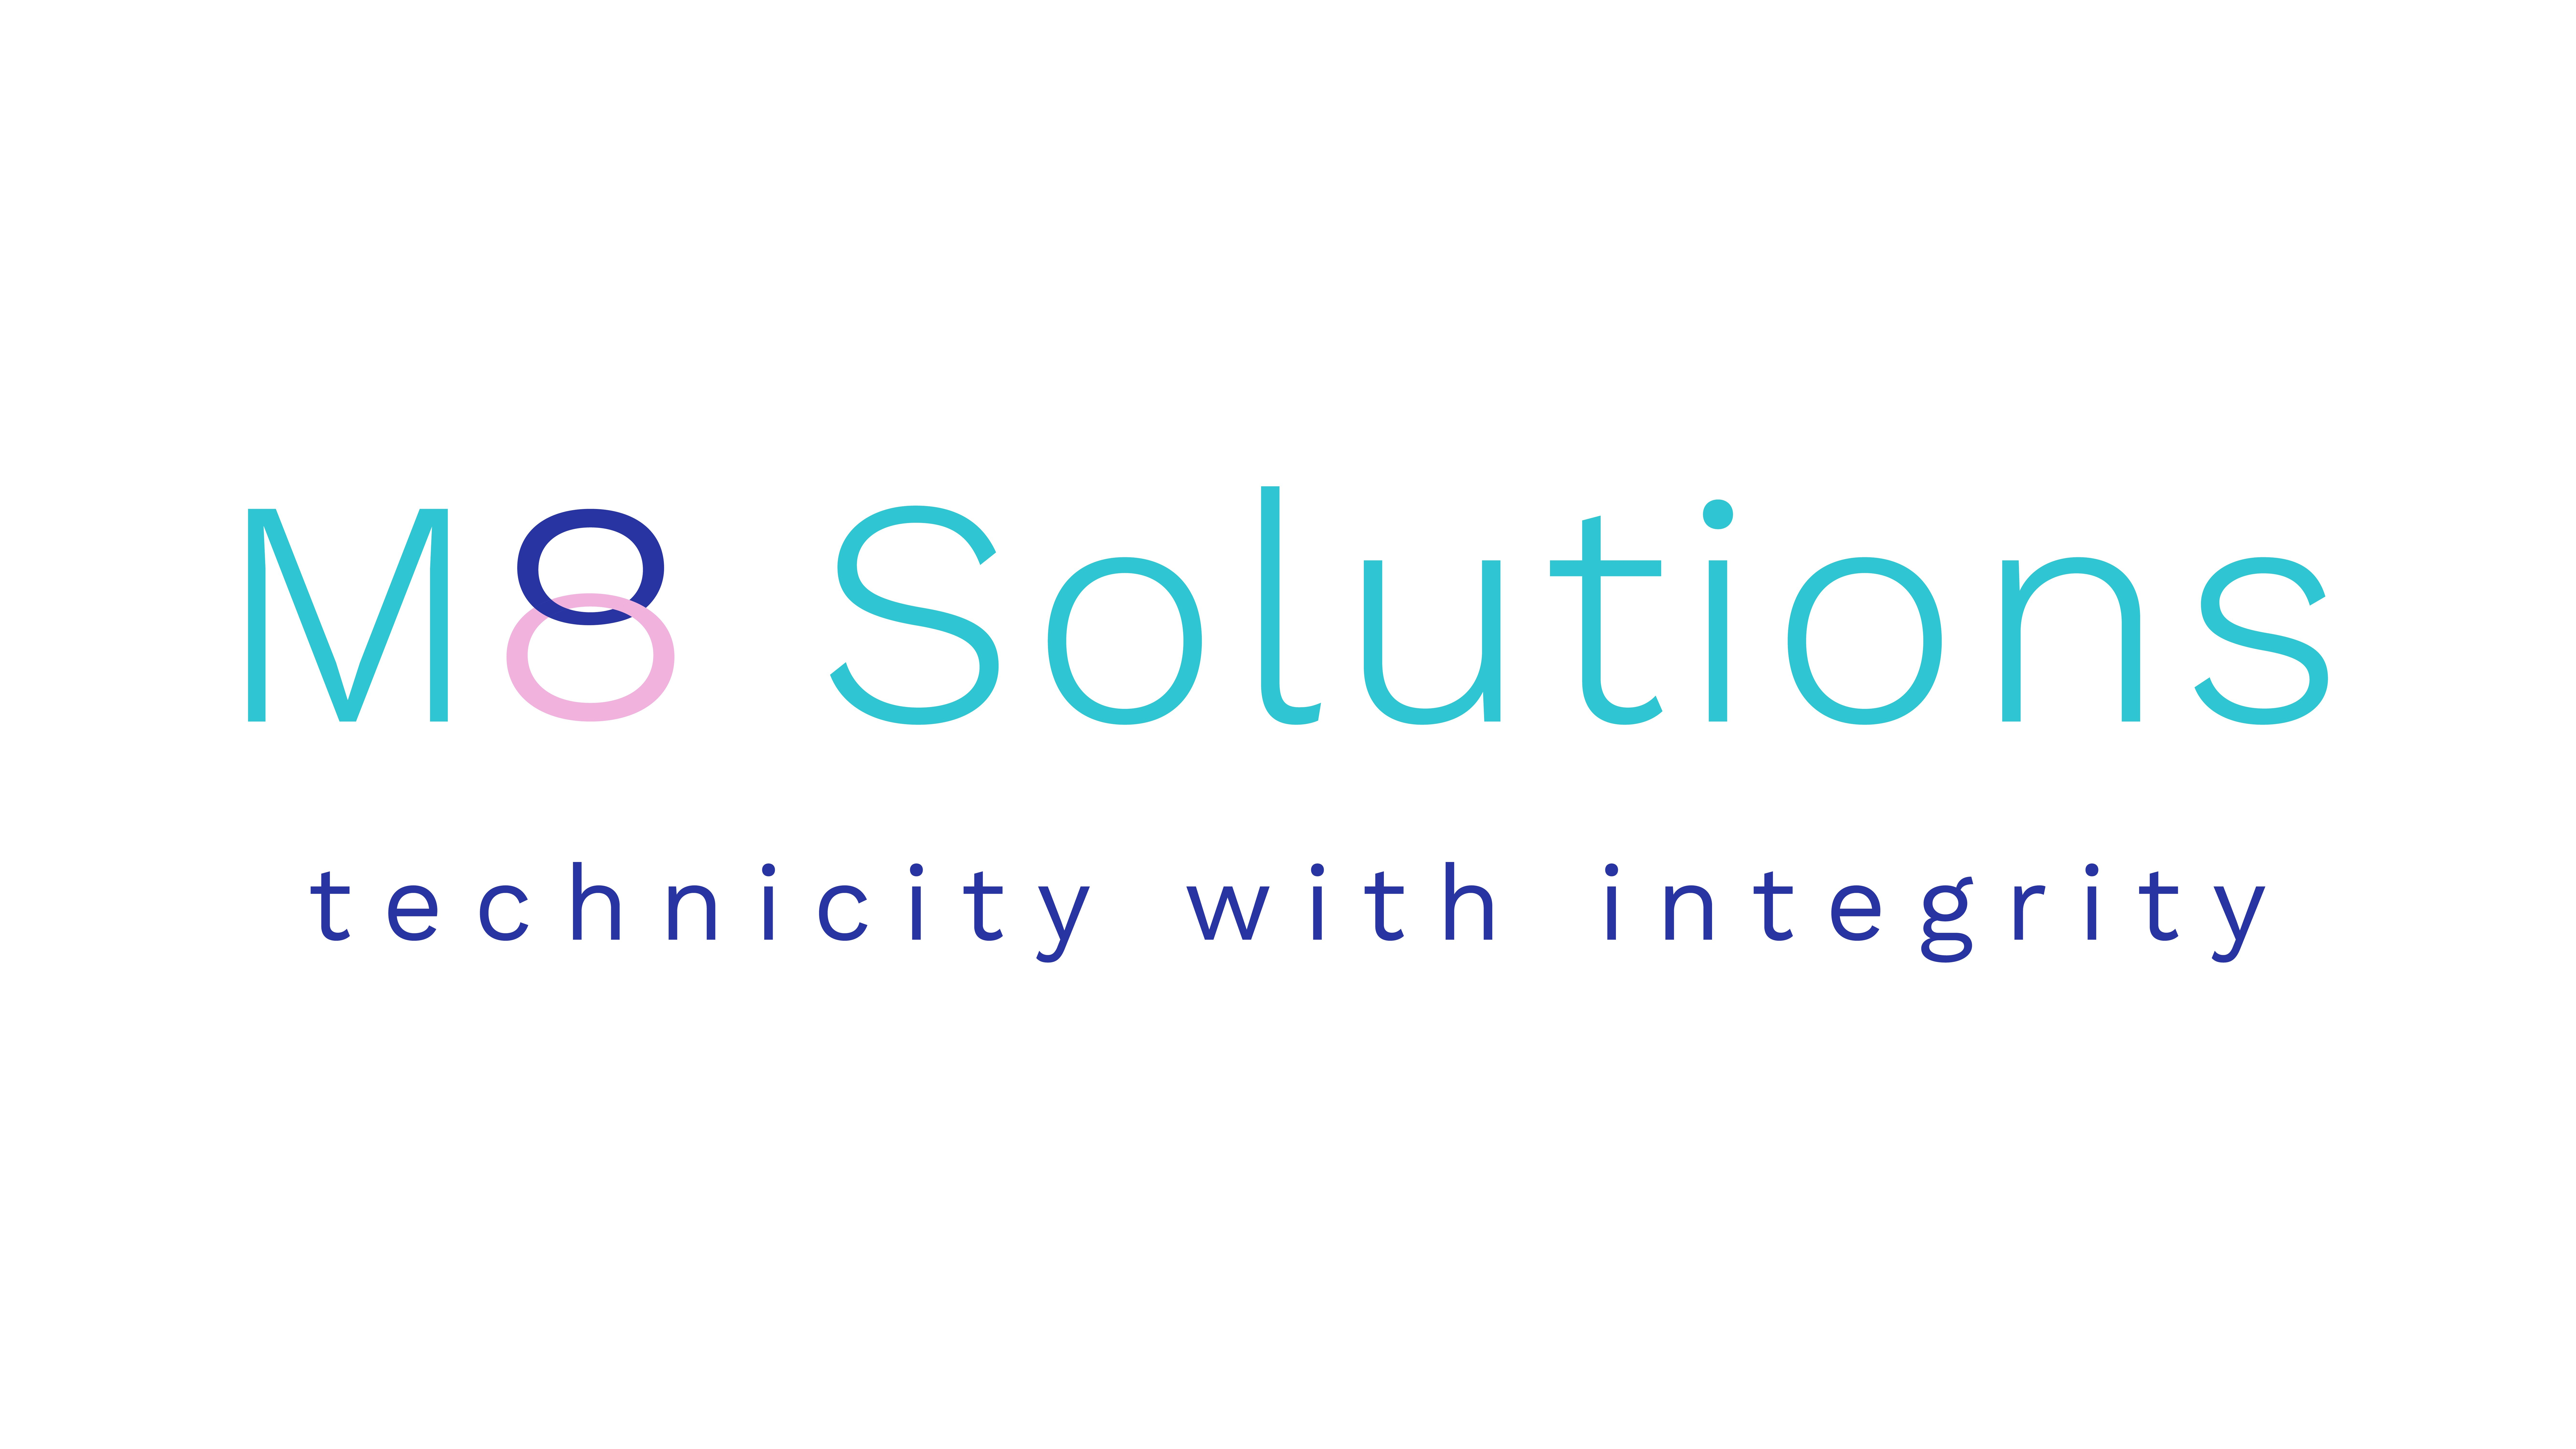 M8 Solutions- Technicity with Integrity